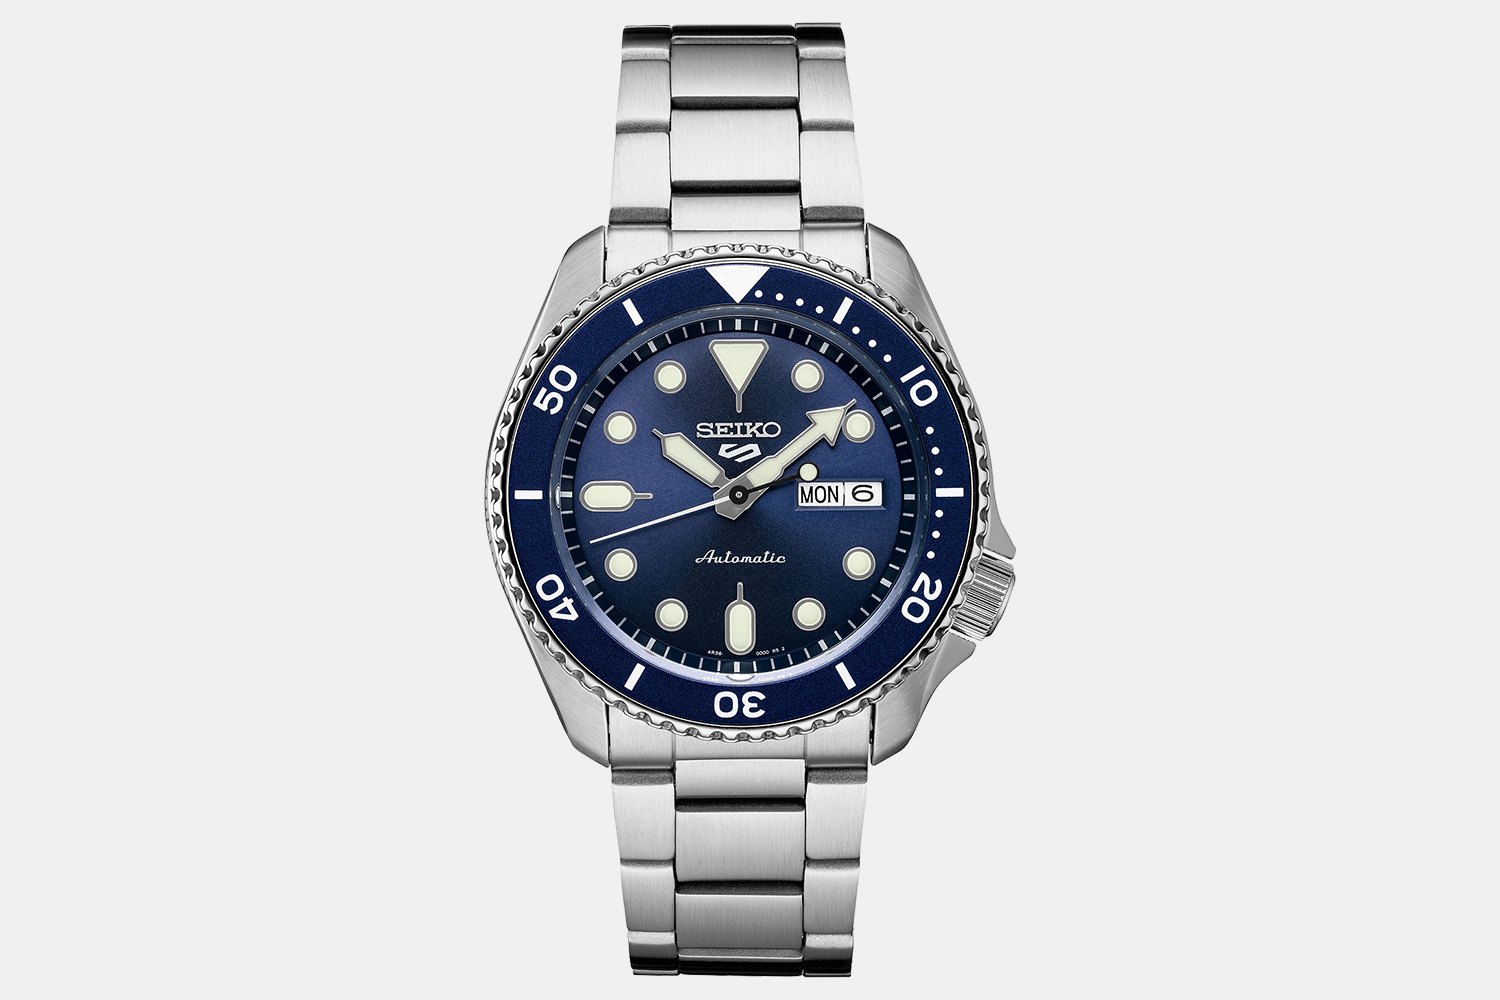 Seiko Automatic 5 Sports Watch With Stainless Steel Bracelet